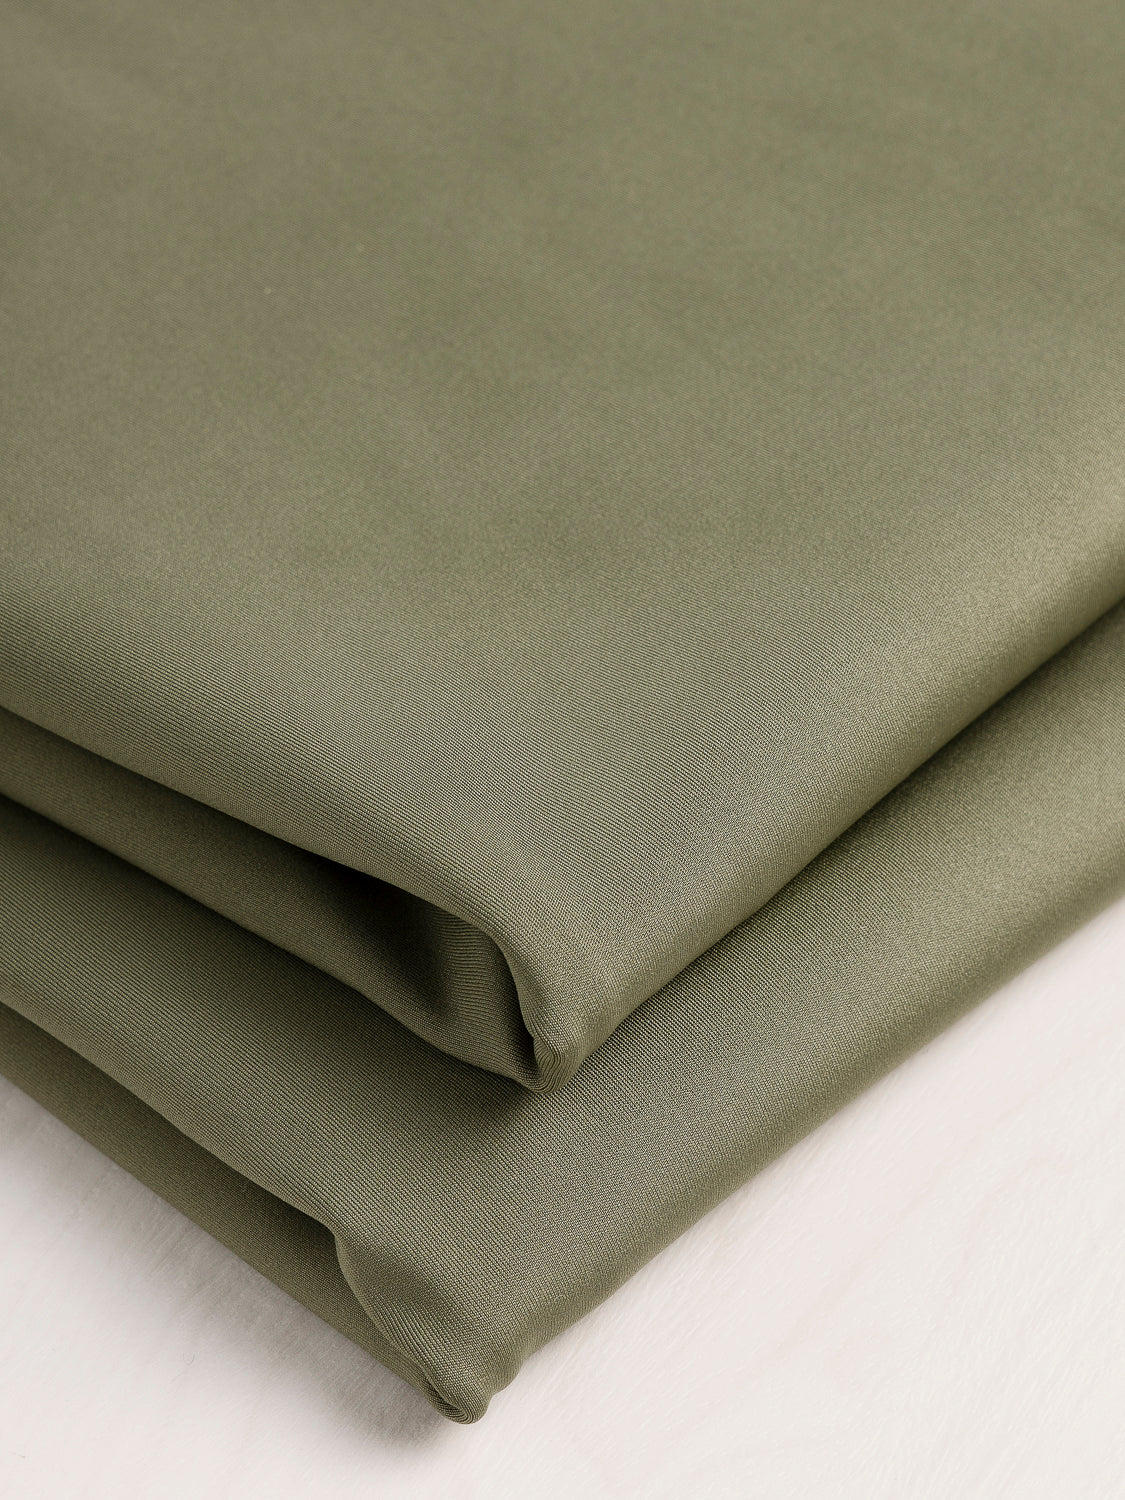 Polyester Mechanical Stretch Durable Water Repellent Fabric